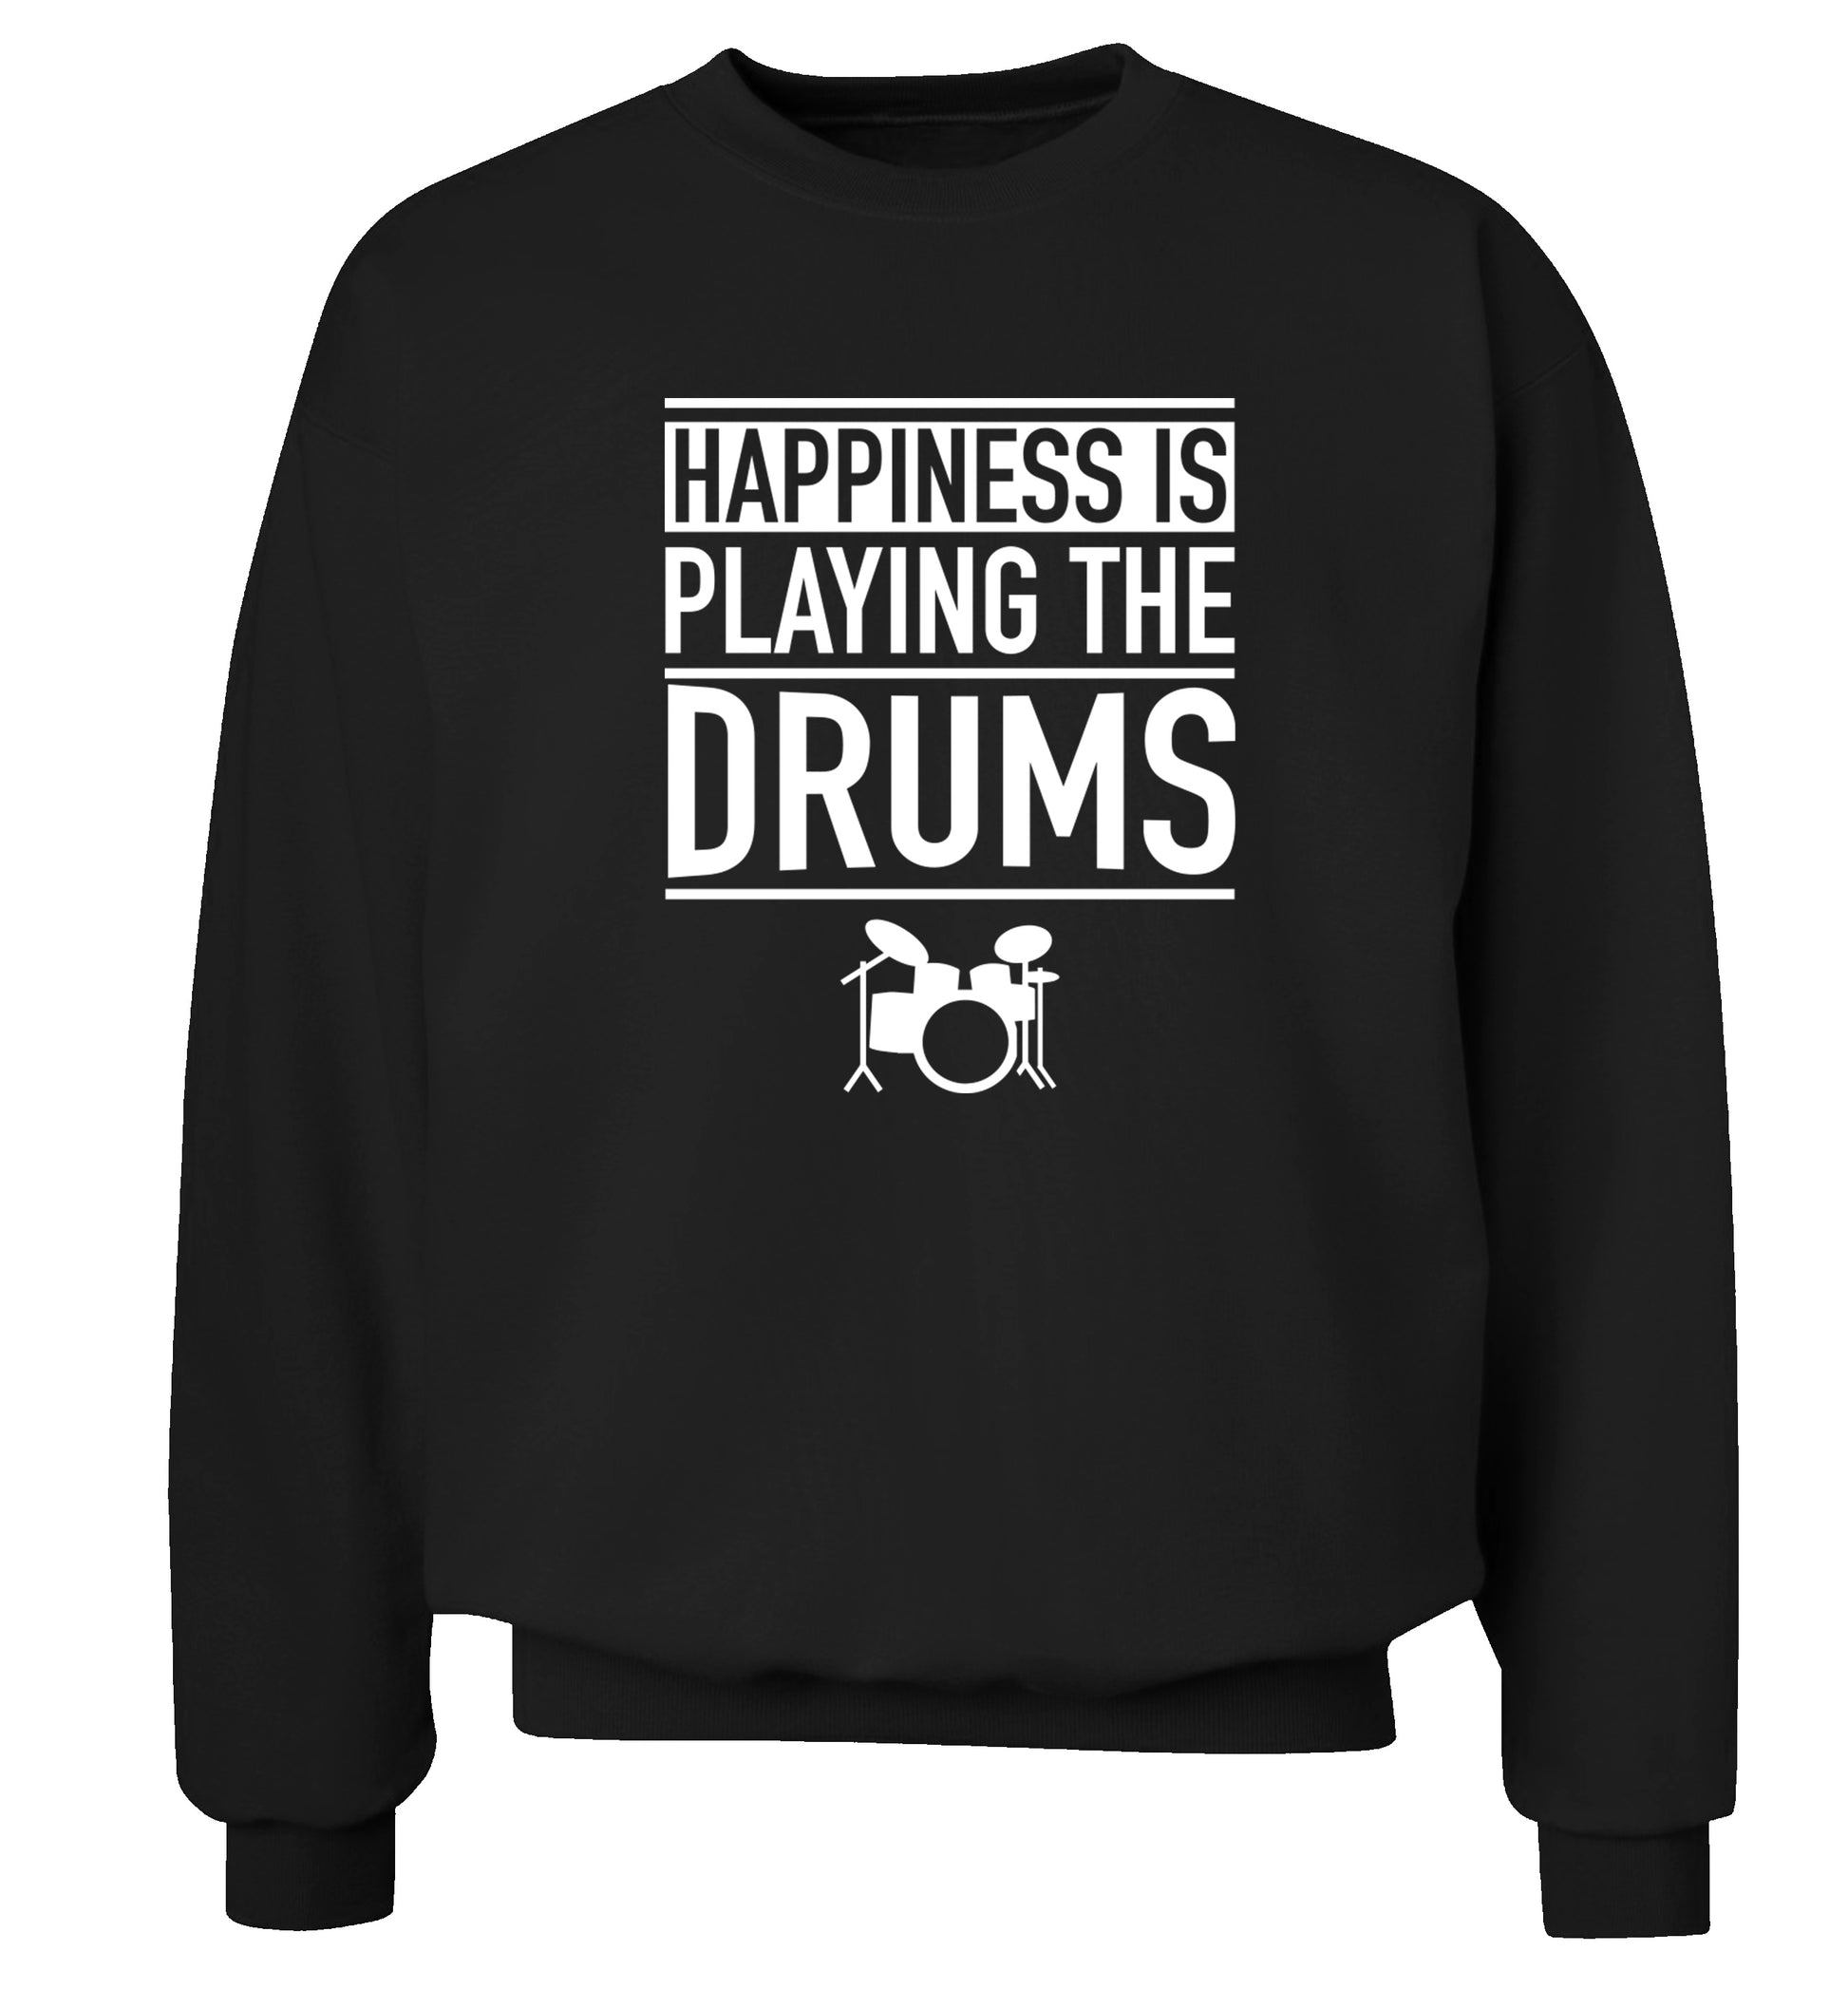 Happiness is playing the drums Adult's unisex black Sweater 2XL